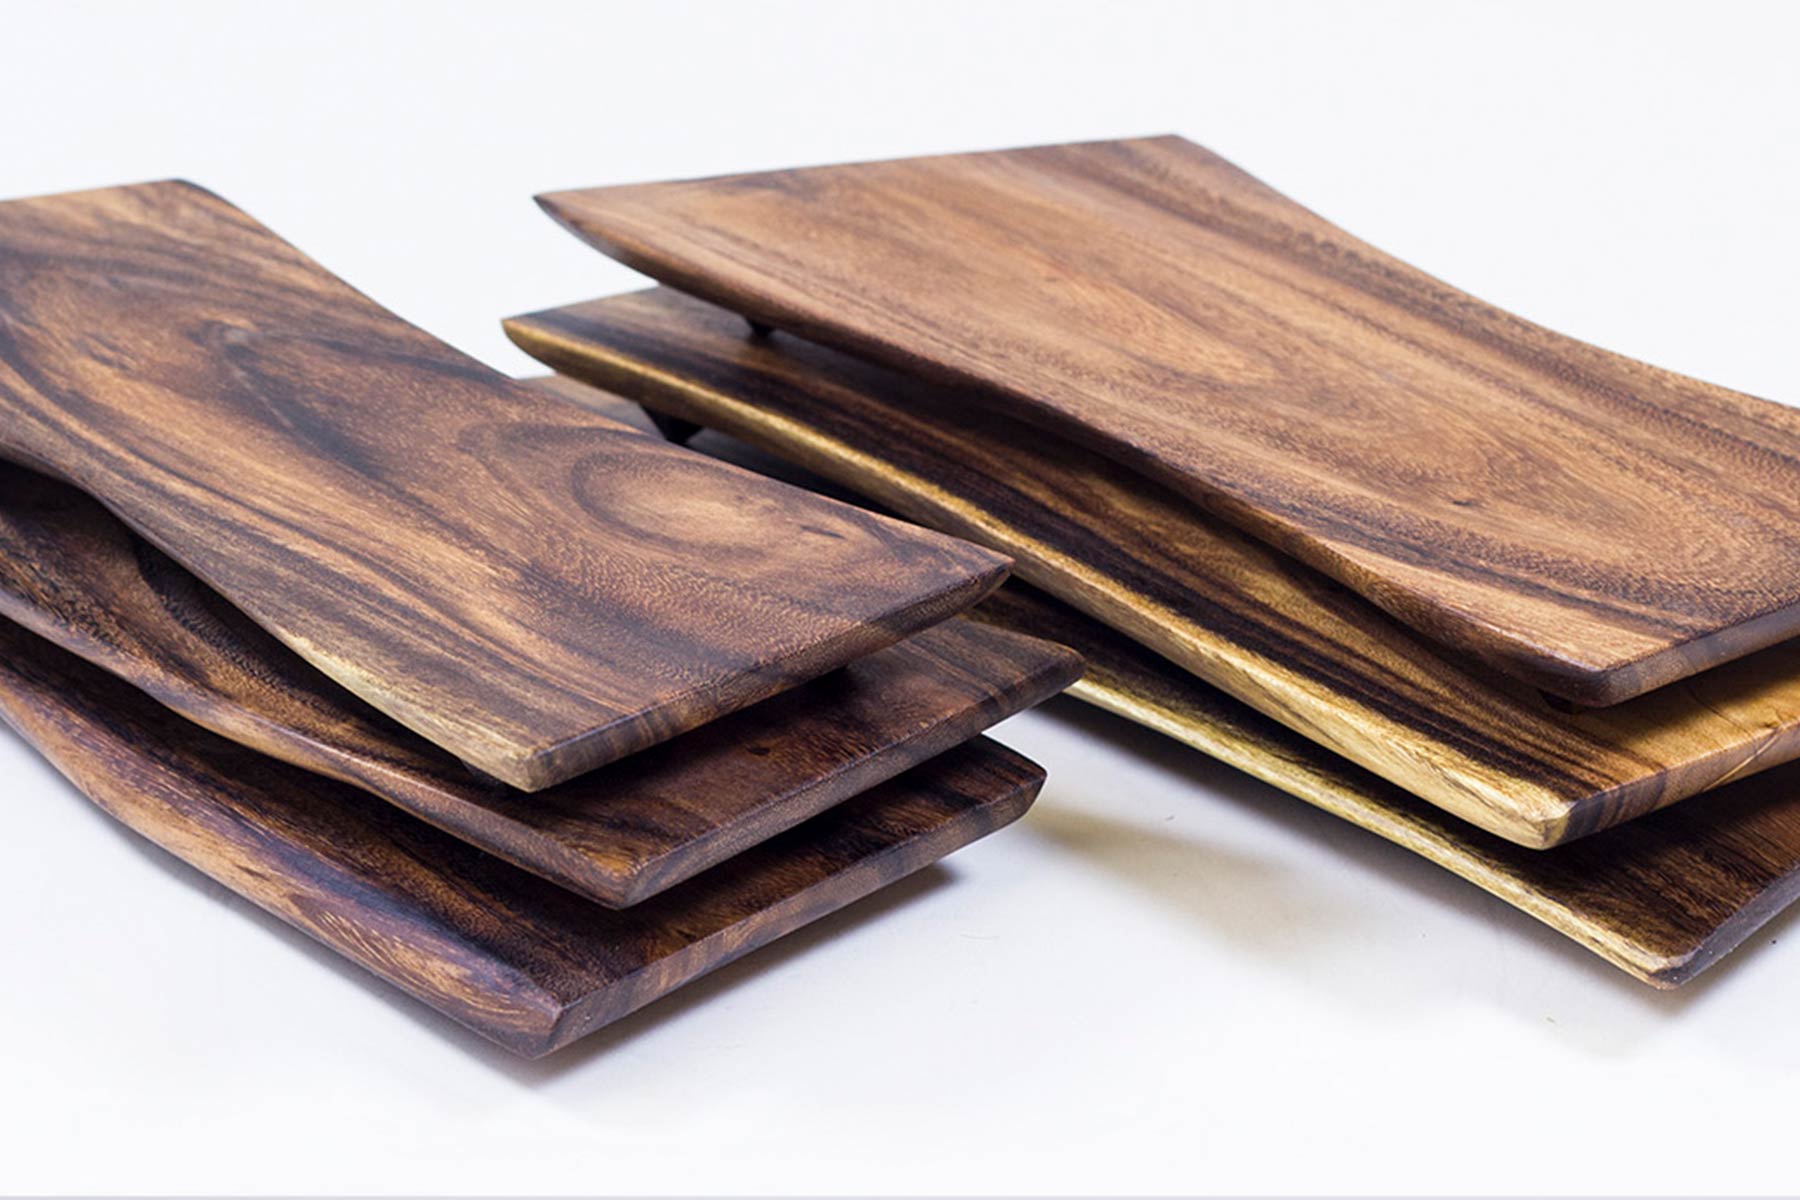 Detail of wooden service trays